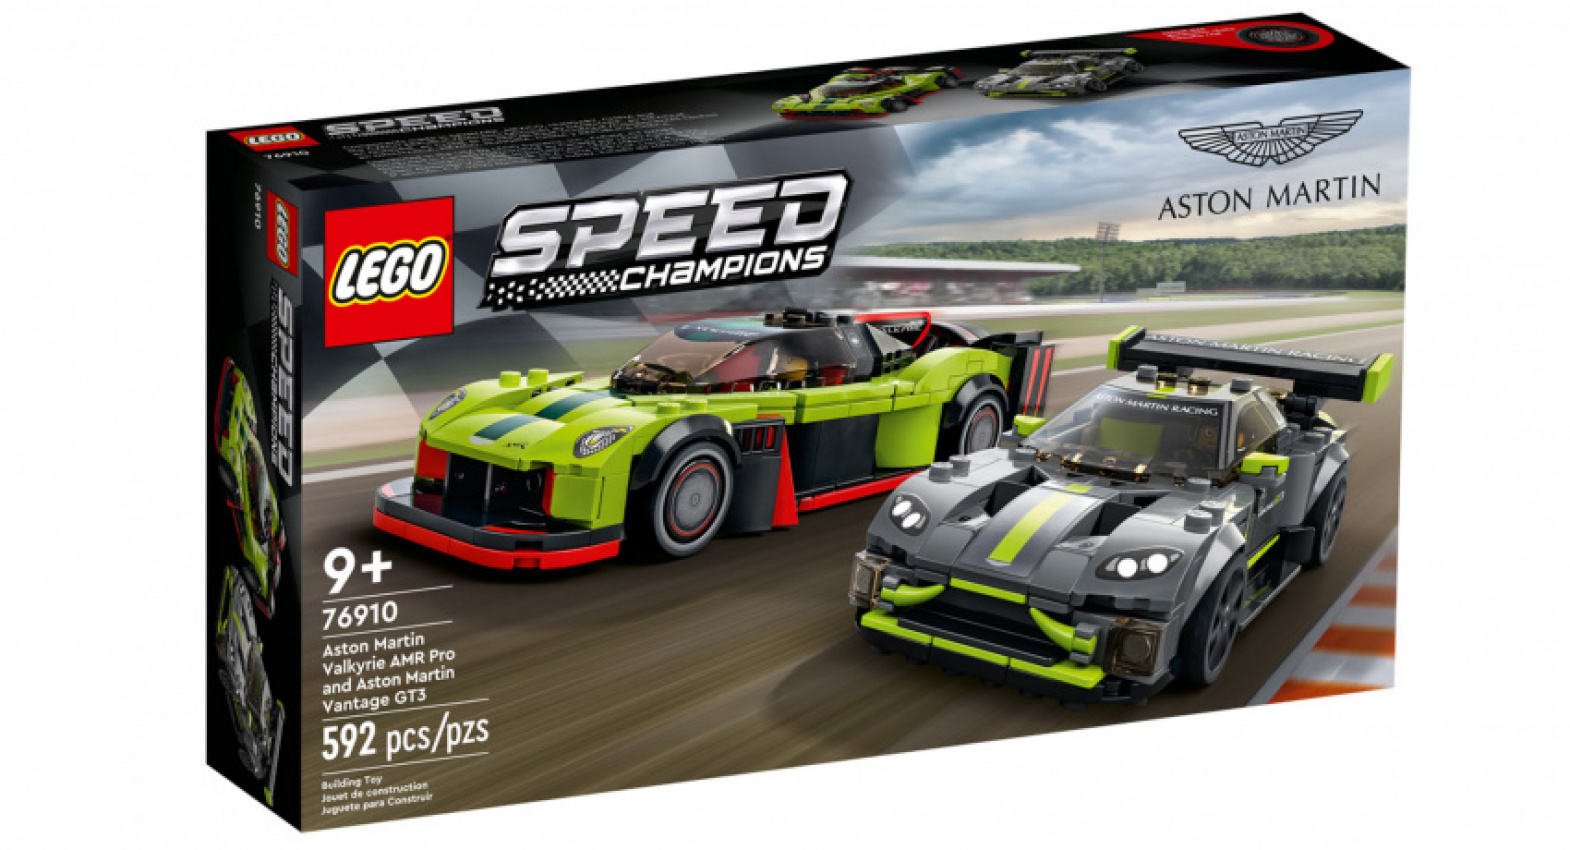 autos, cars, mercedes-benz, mg, news, aston martin, aston martin valkyrie, aston martin vantage, ferrari, lamborghini, lamborghini countach, lego, mercedes, mercedes-amg one, scale models, you can now buy a lego set with hamilton’s mercedes f1 car and the amg project one